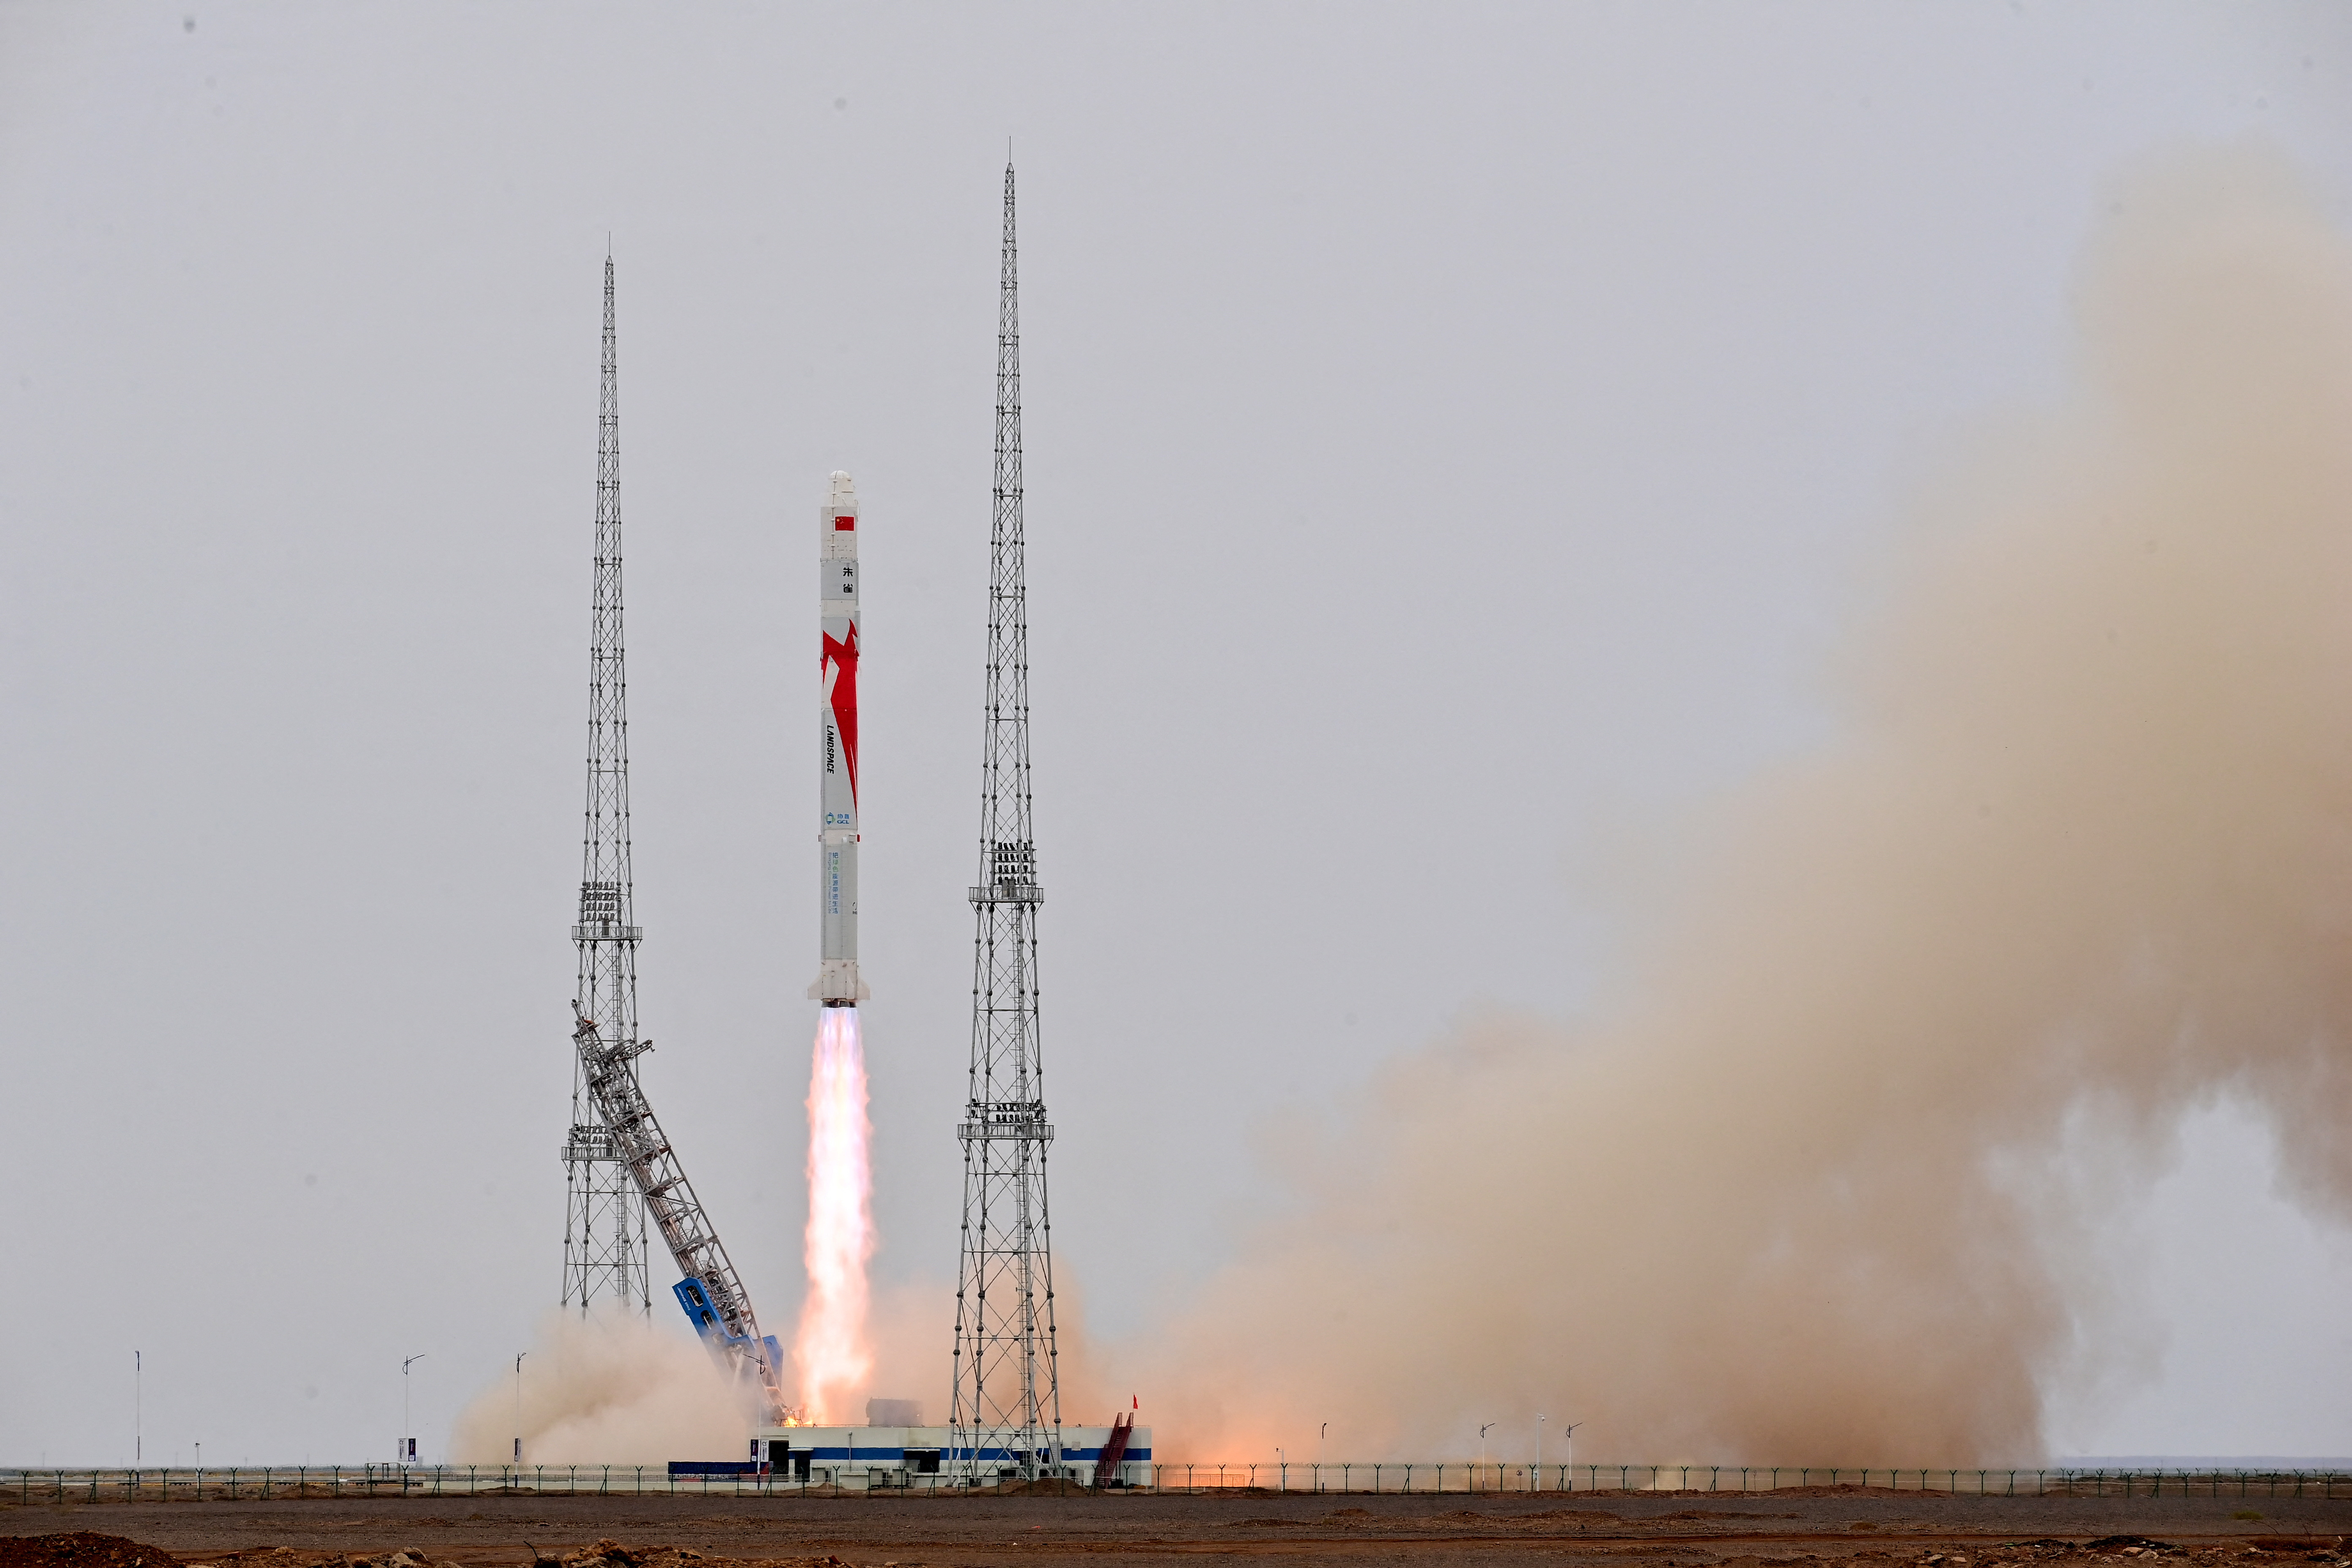 Zhuque-2 carrier rocket takes off from the Jiuquan Satellite Launch Center